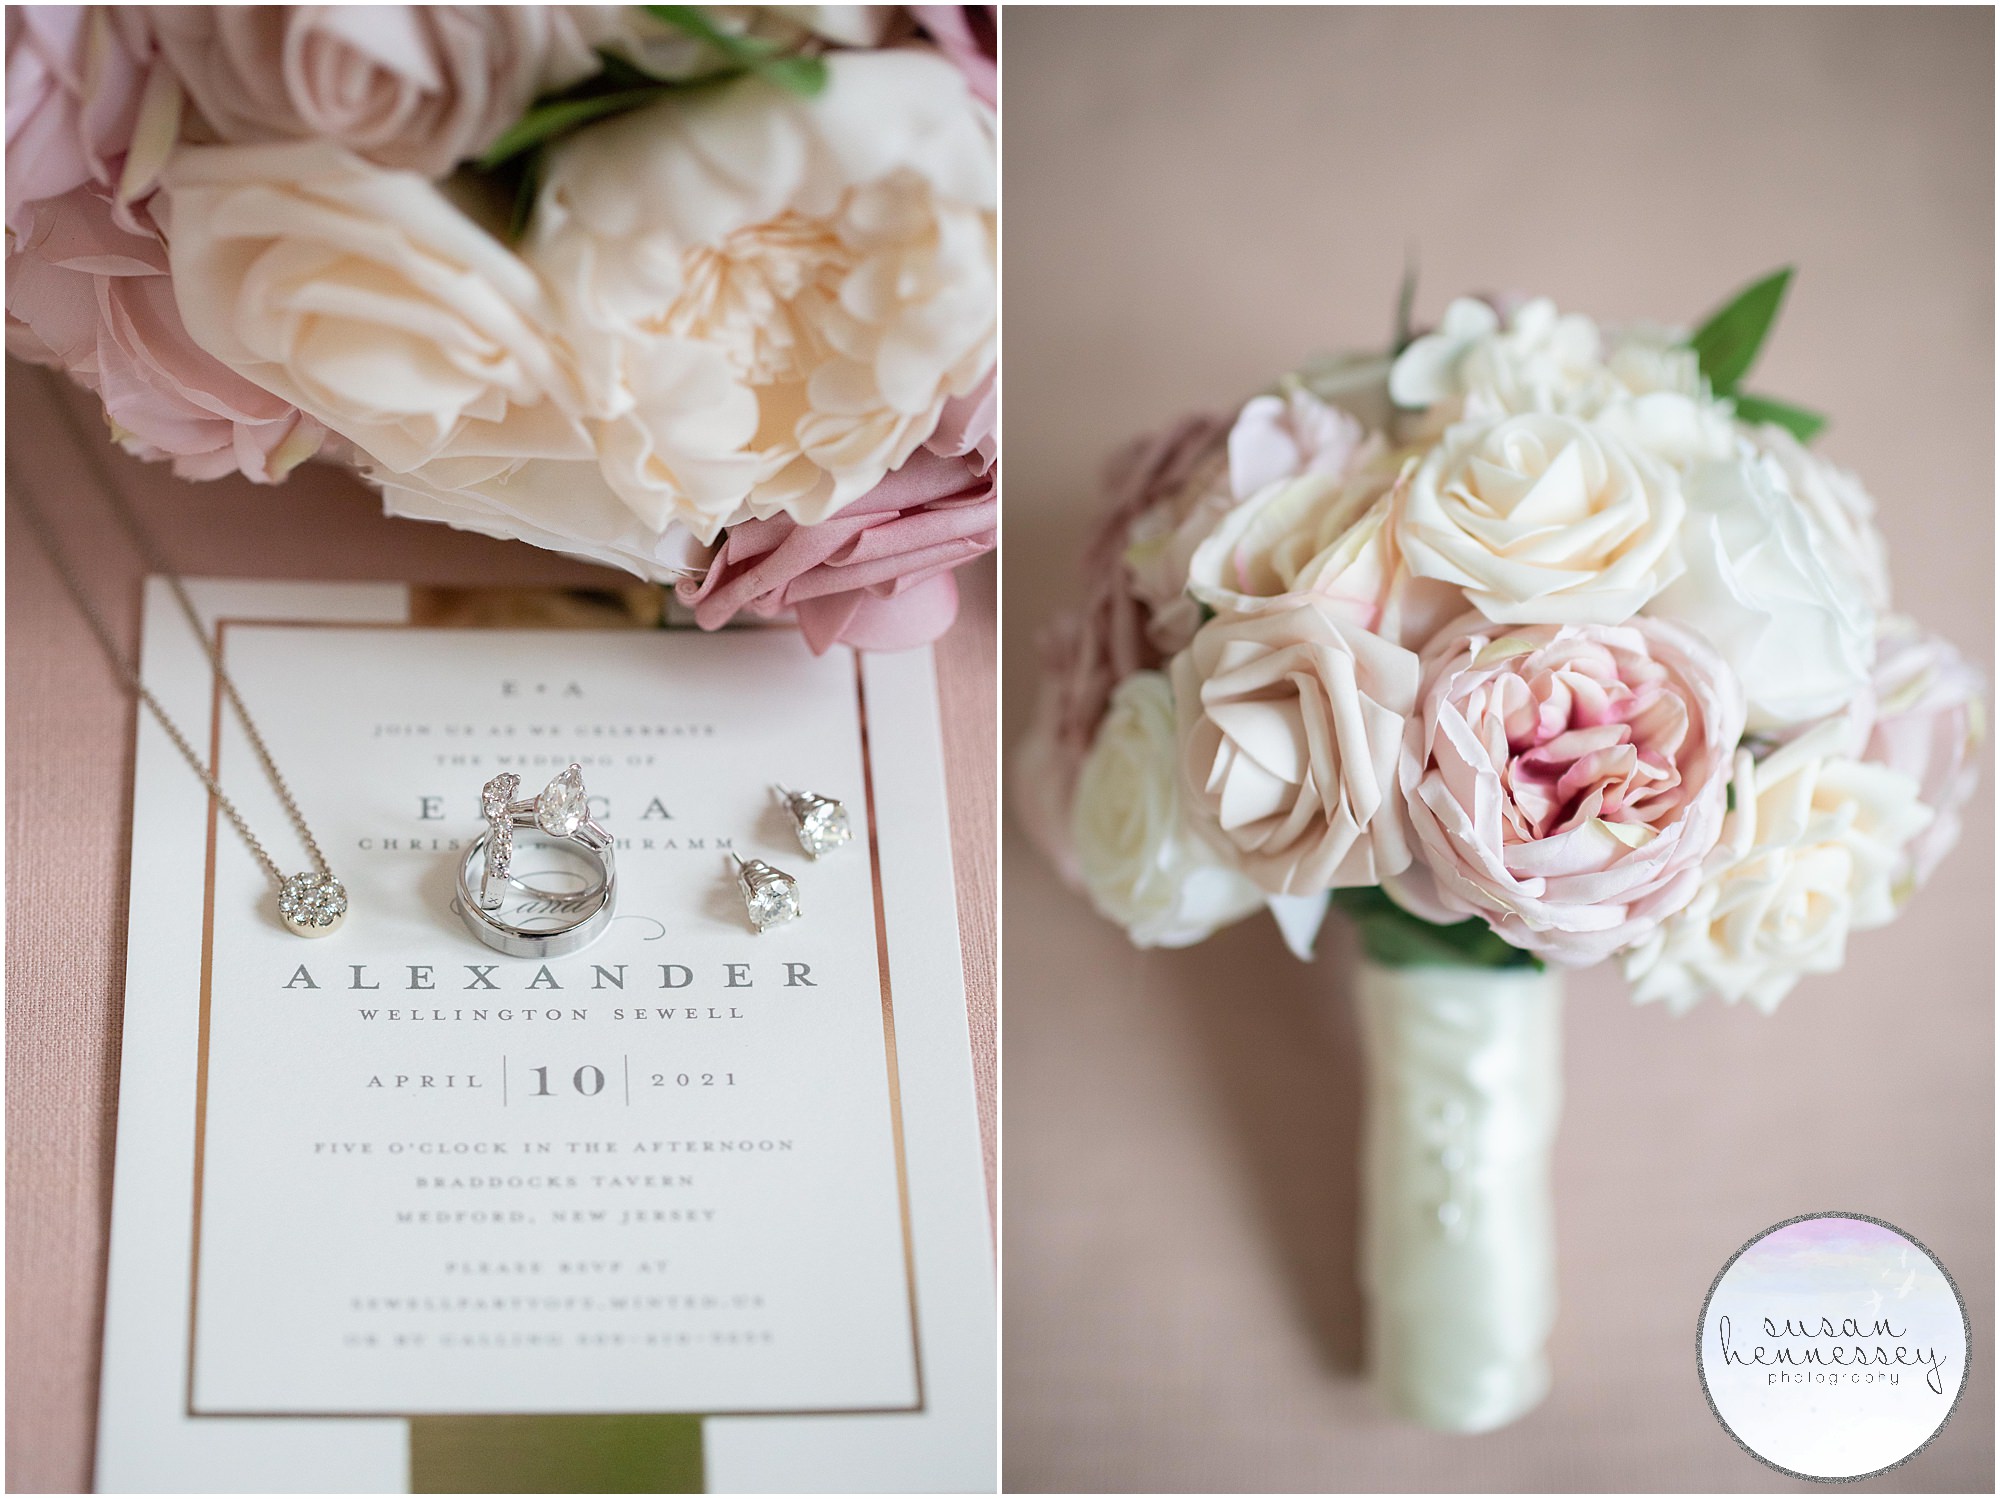 Planning a Micro Wedding? Erica and Alex had a dusty pink color palette.